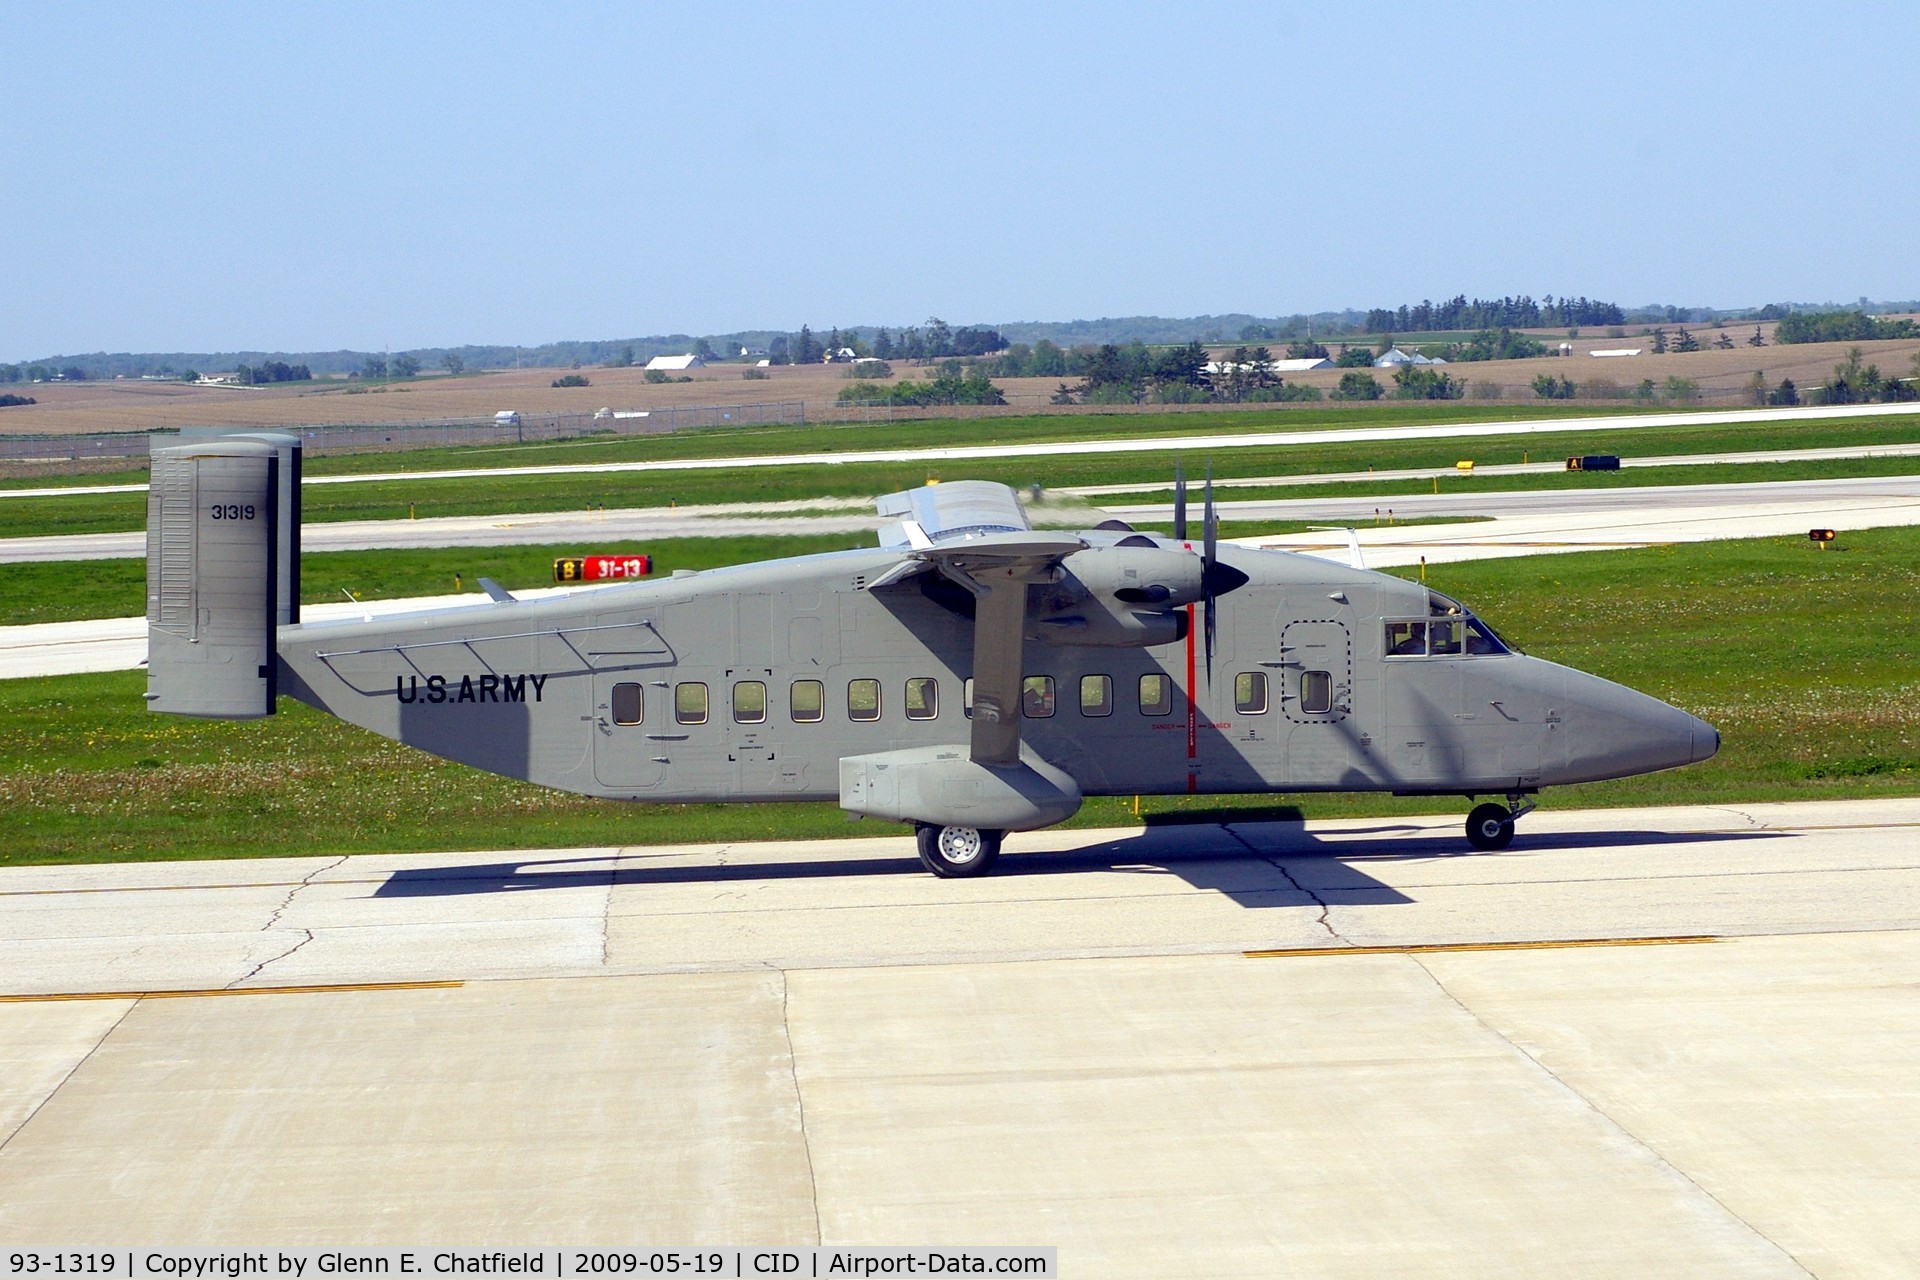 93-1319, 1993 Short C-23B Sherpa C/N AK-003, Taxiing on Delta on the way to Rockwell-Collins